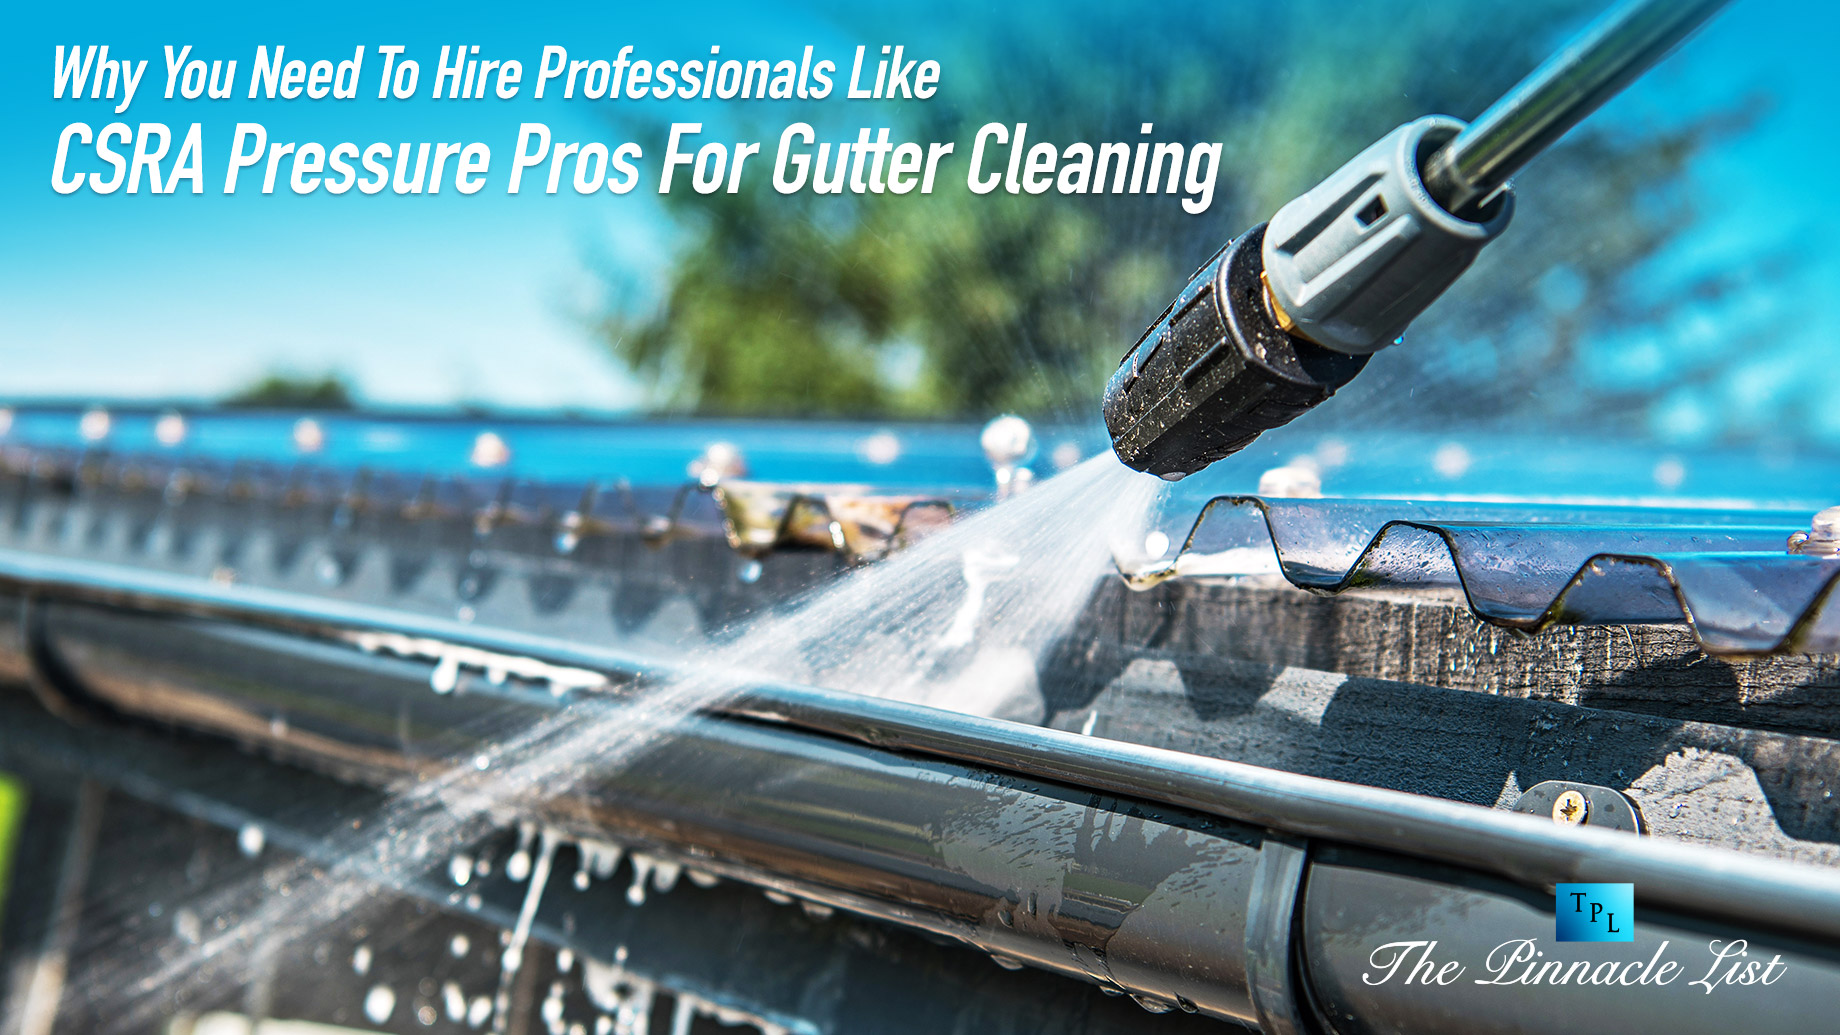 Why You Need To Hire Professionals Like CSRA Pressure Pros For Gutter Cleaning